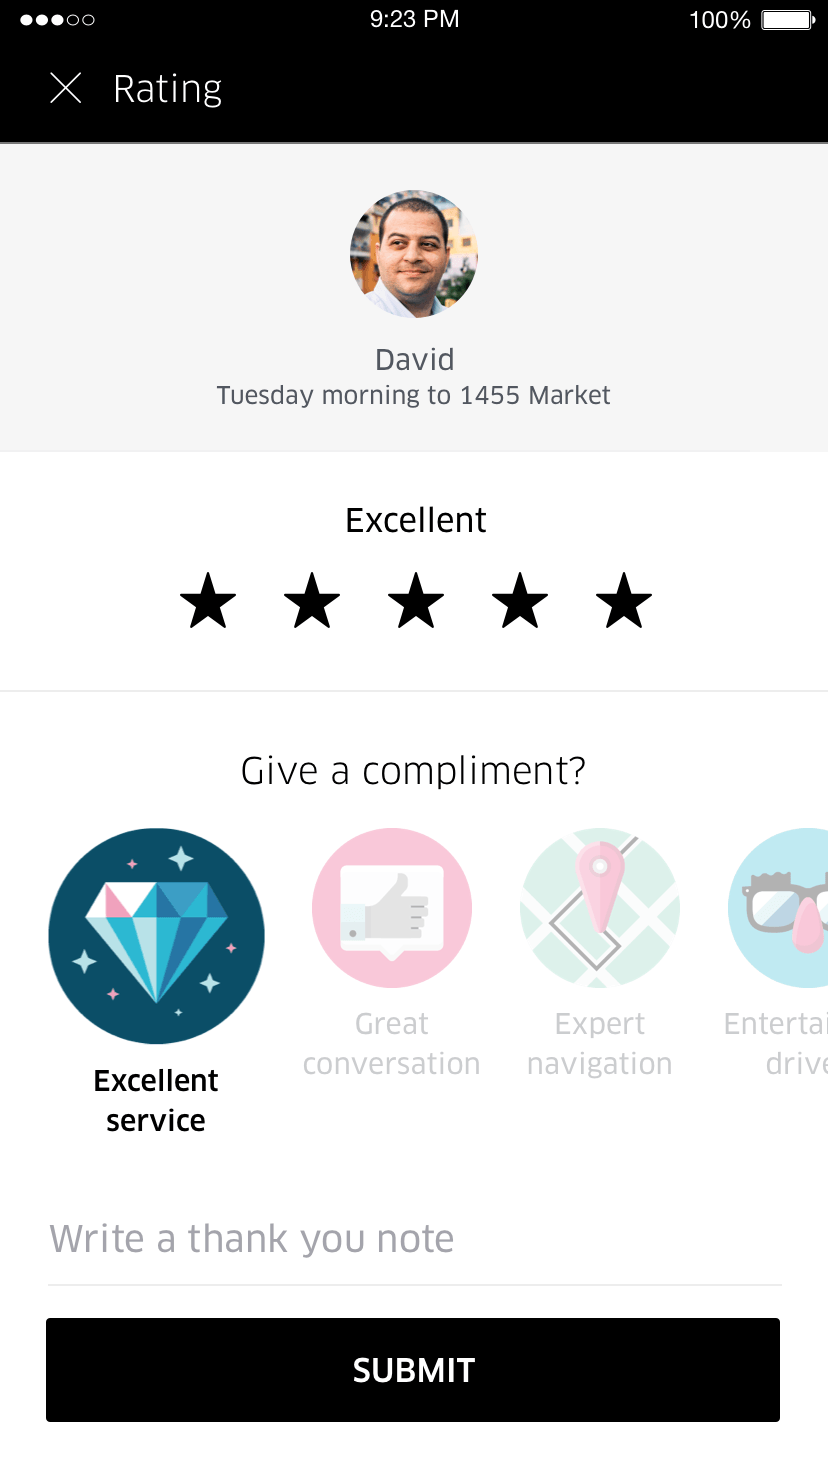 Product feedback example from Uber